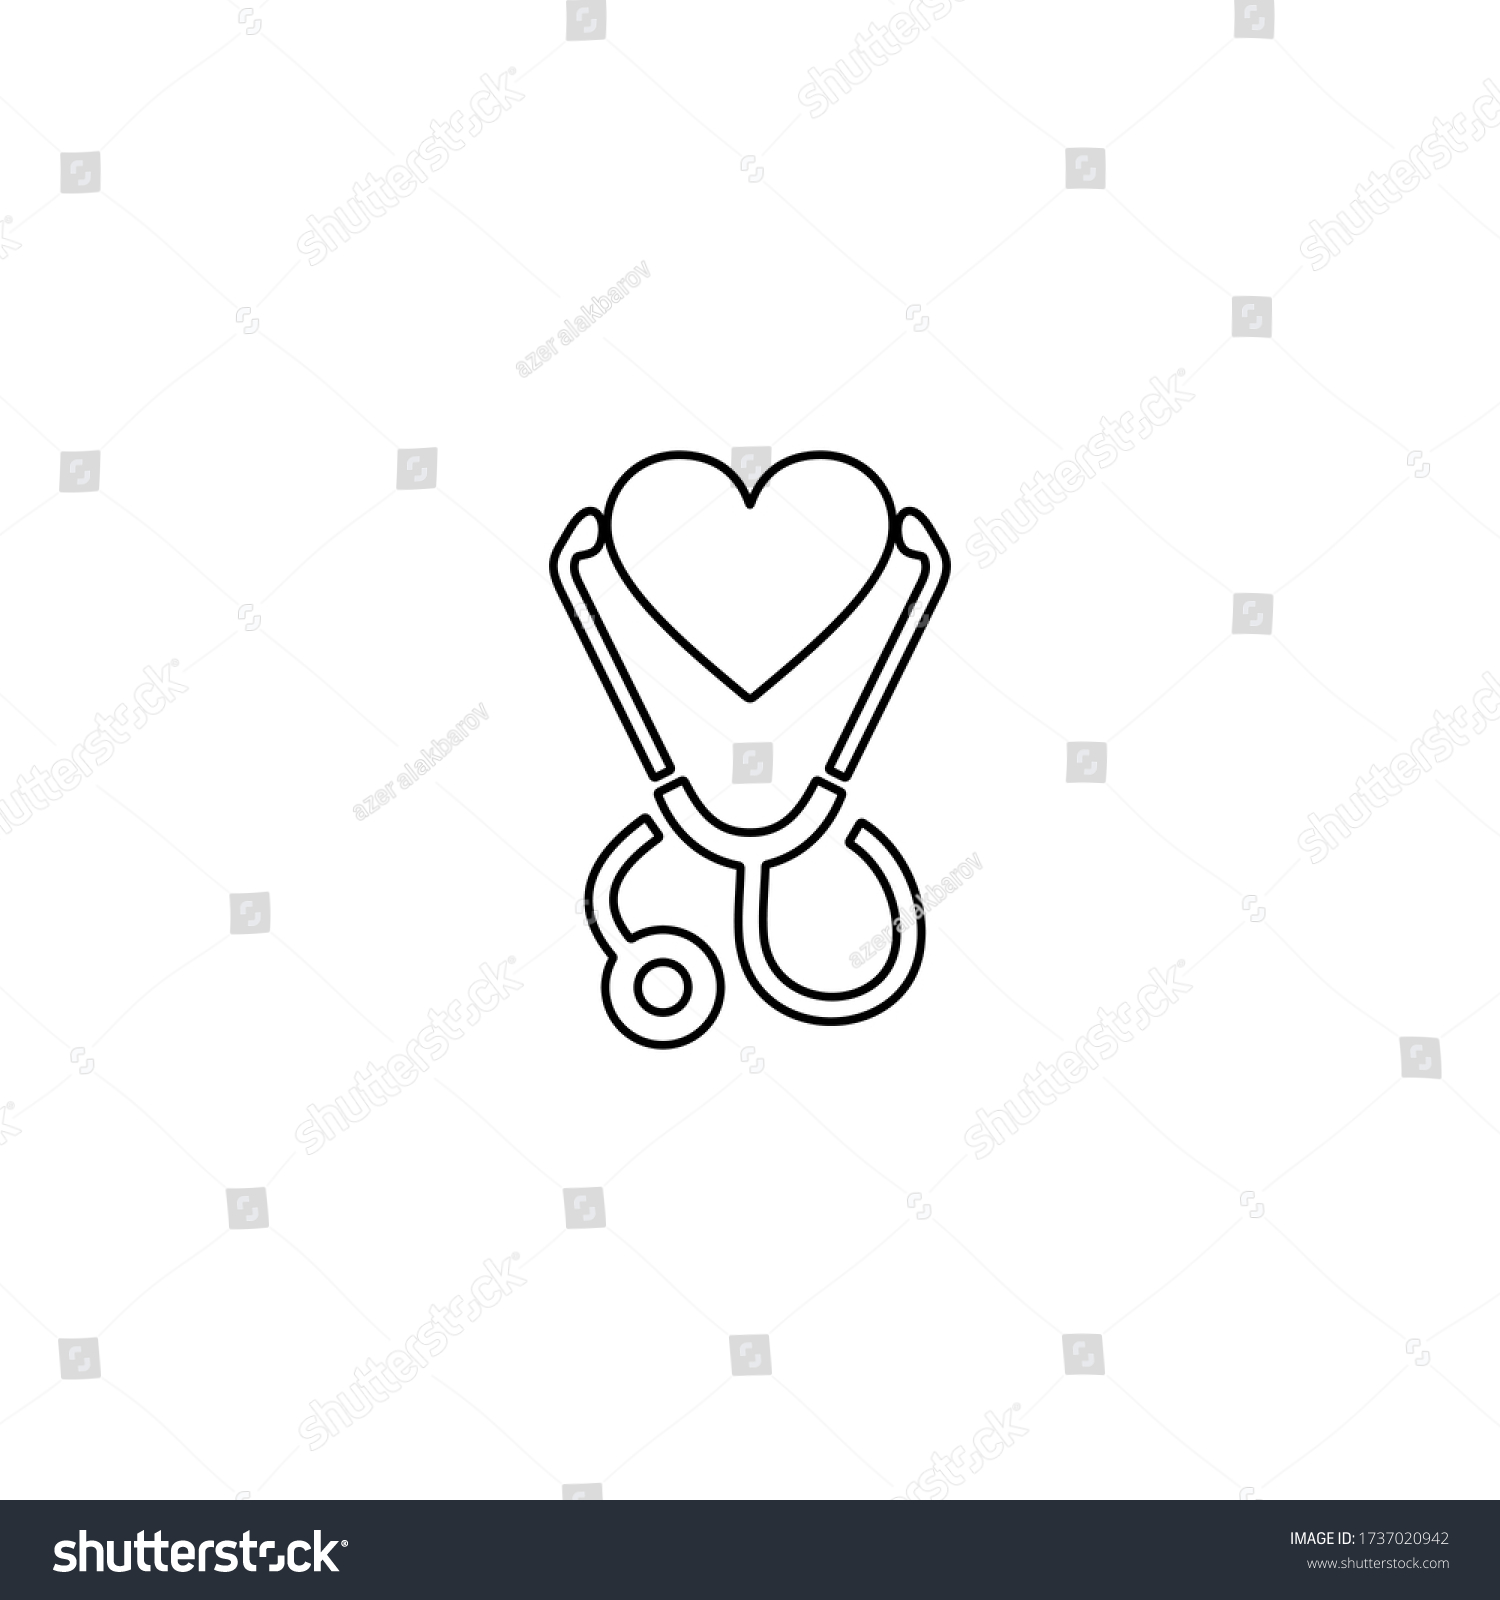 SVG of Stethoscope and heart symbol. Listening heartbeat. Heart rate measurement. Line icon design for health concept. svg